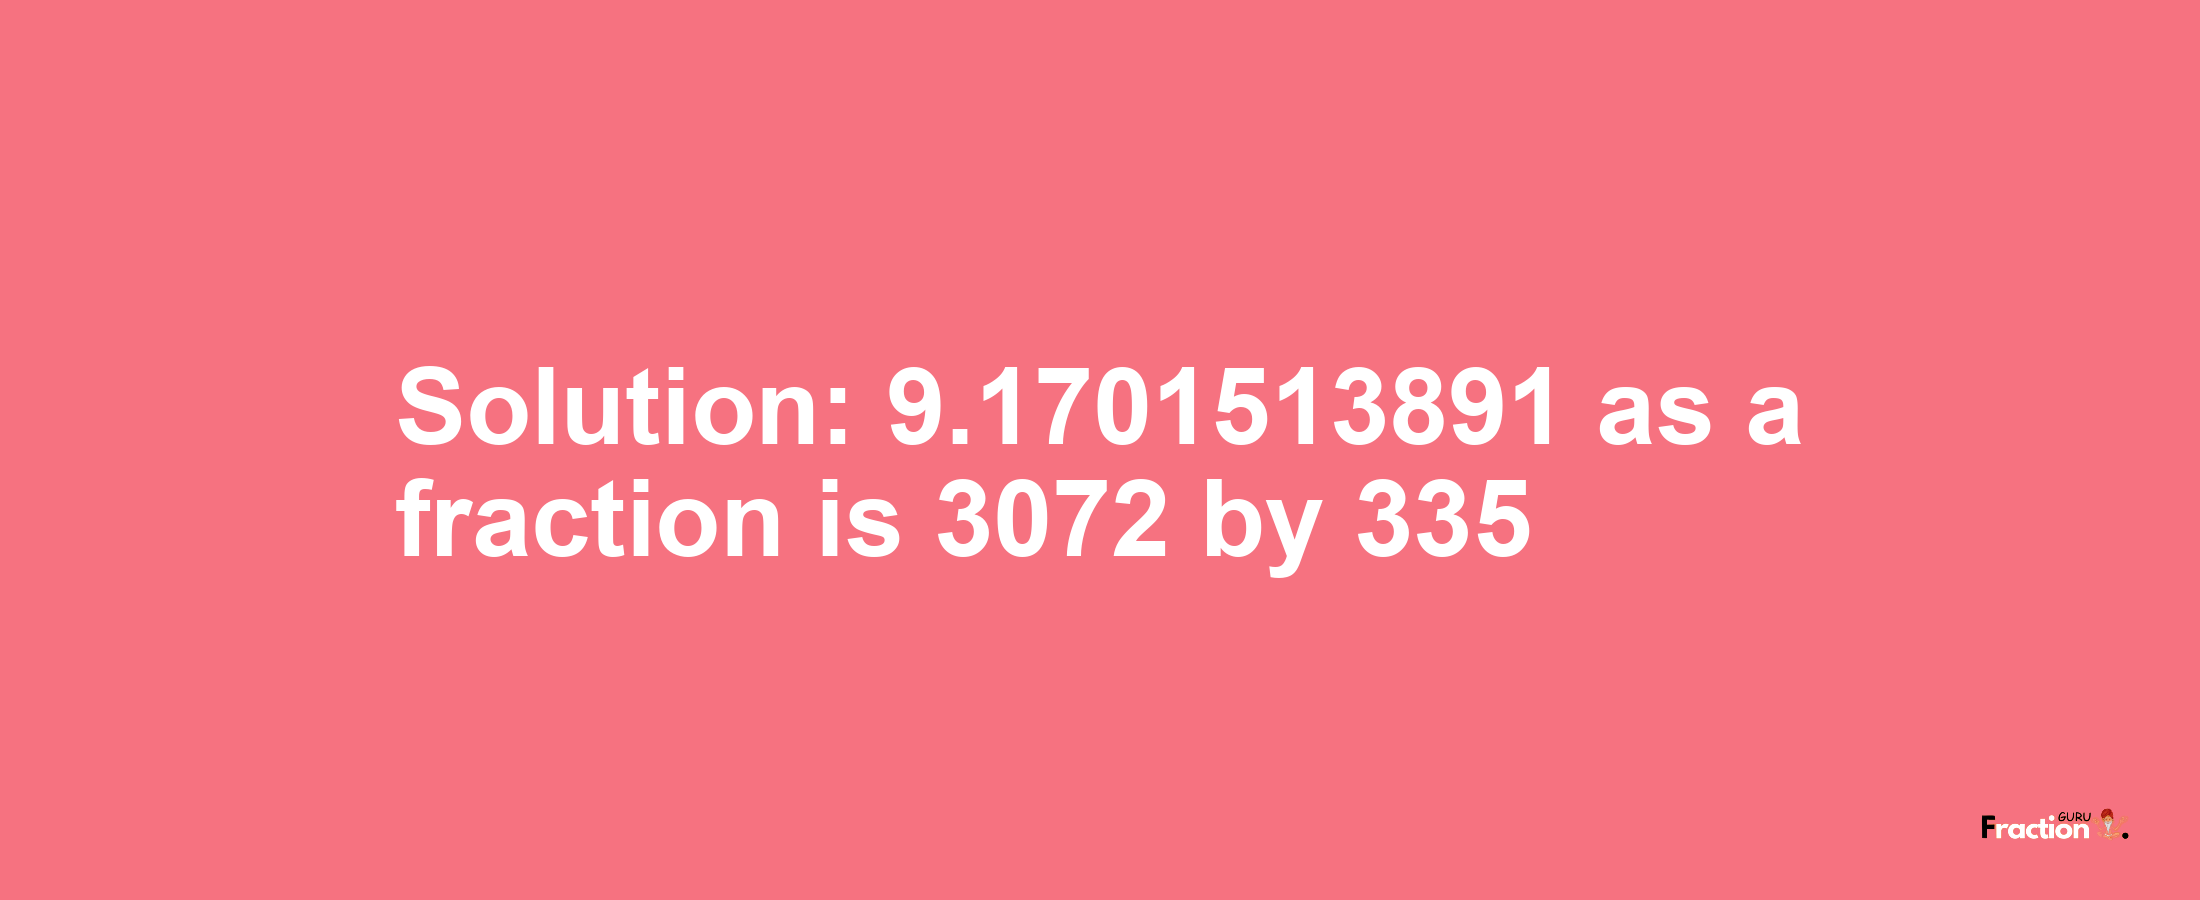 Solution:9.1701513891 as a fraction is 3072/335